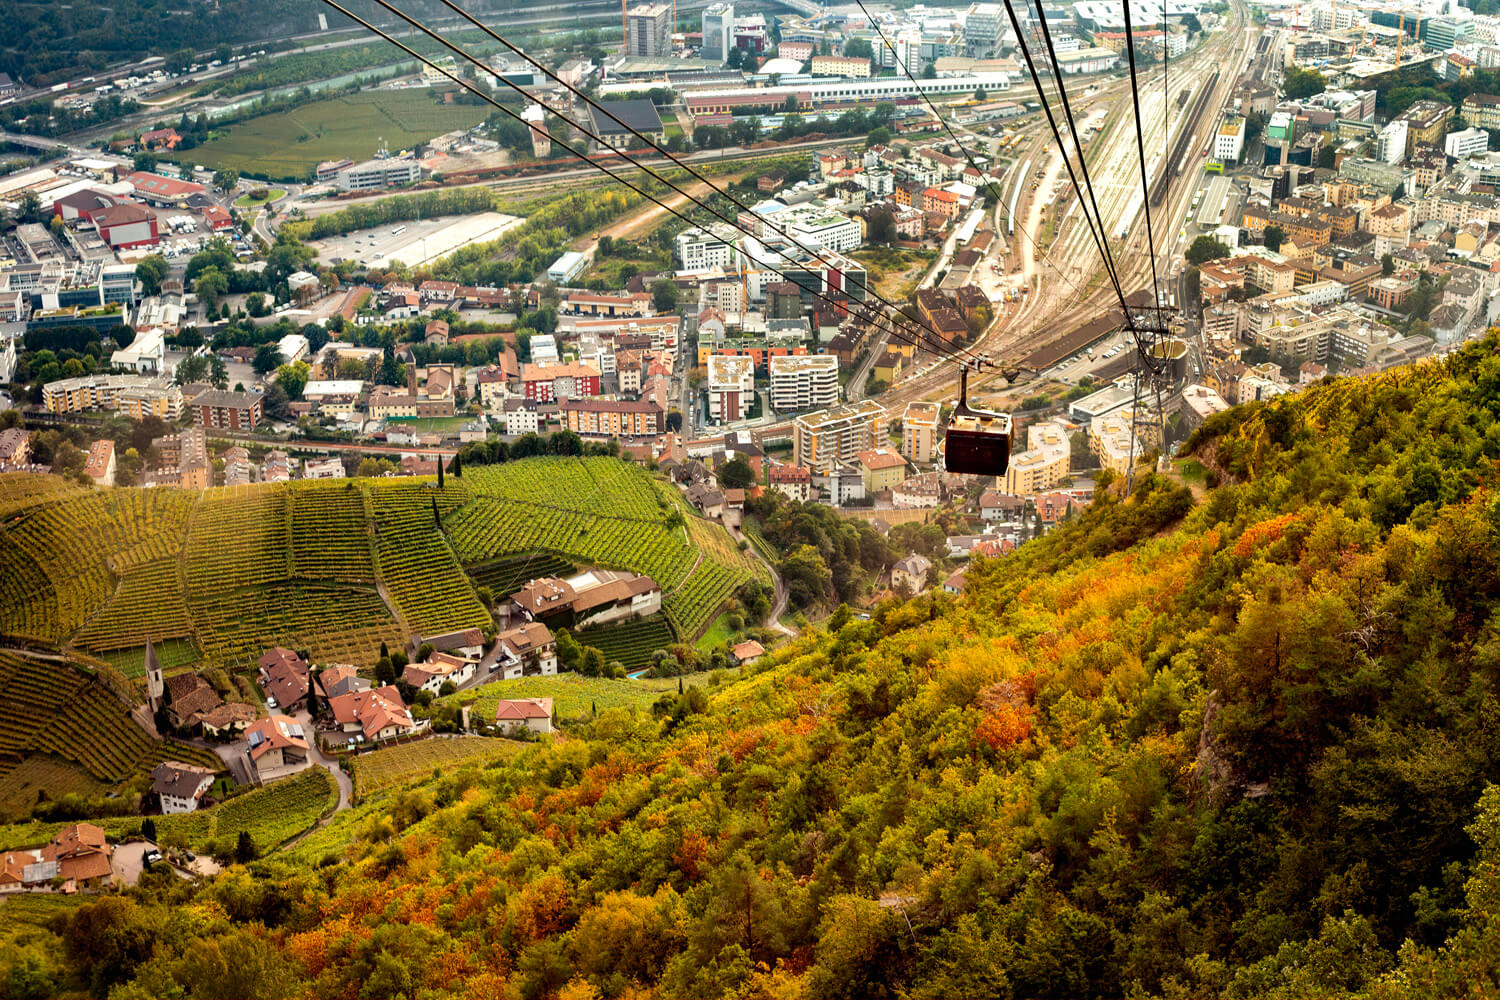 A cable car descends over a vibrant, patchwork landscape where the rich greens of vineyard rows meet the colorful autumn foliage, with a bustling cityscape stretching into the distance, showing the border between nature and urban development.